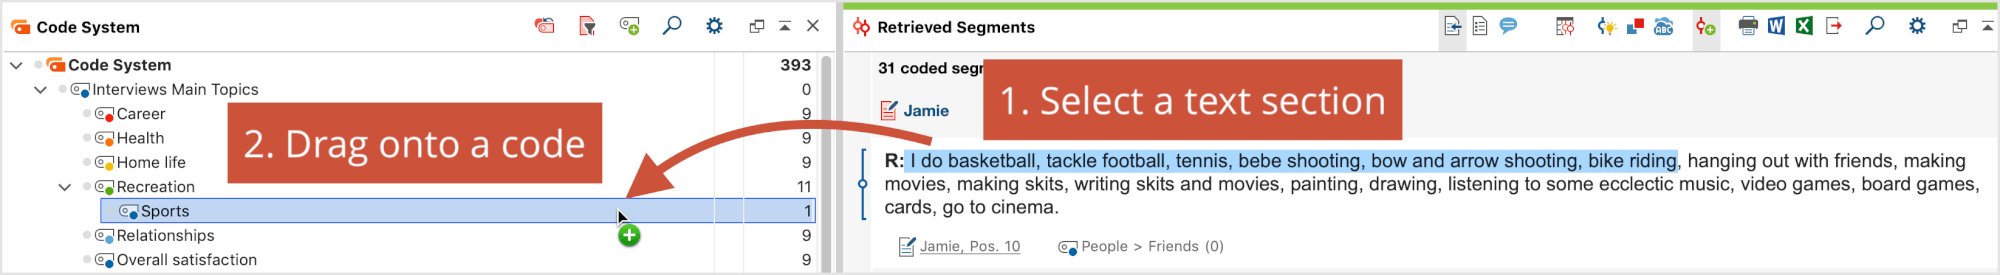 Coding text passages direcly in the Retrieved Segments window